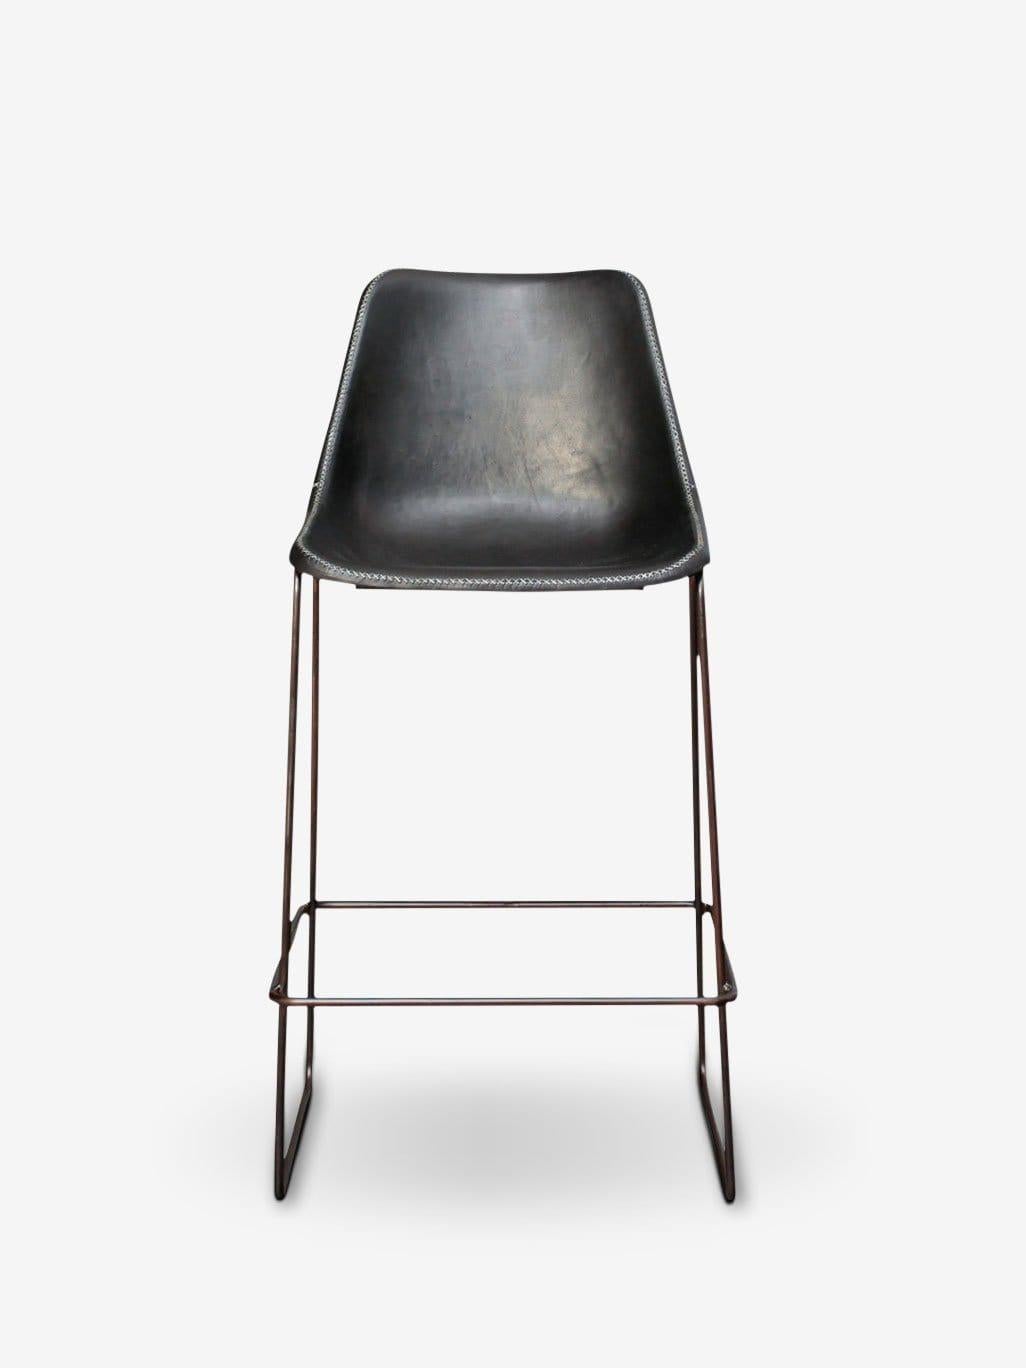 High Leather Giron Bar Stool by Sol Y Luna In New Condition For Sale In Sag Harbor, NY